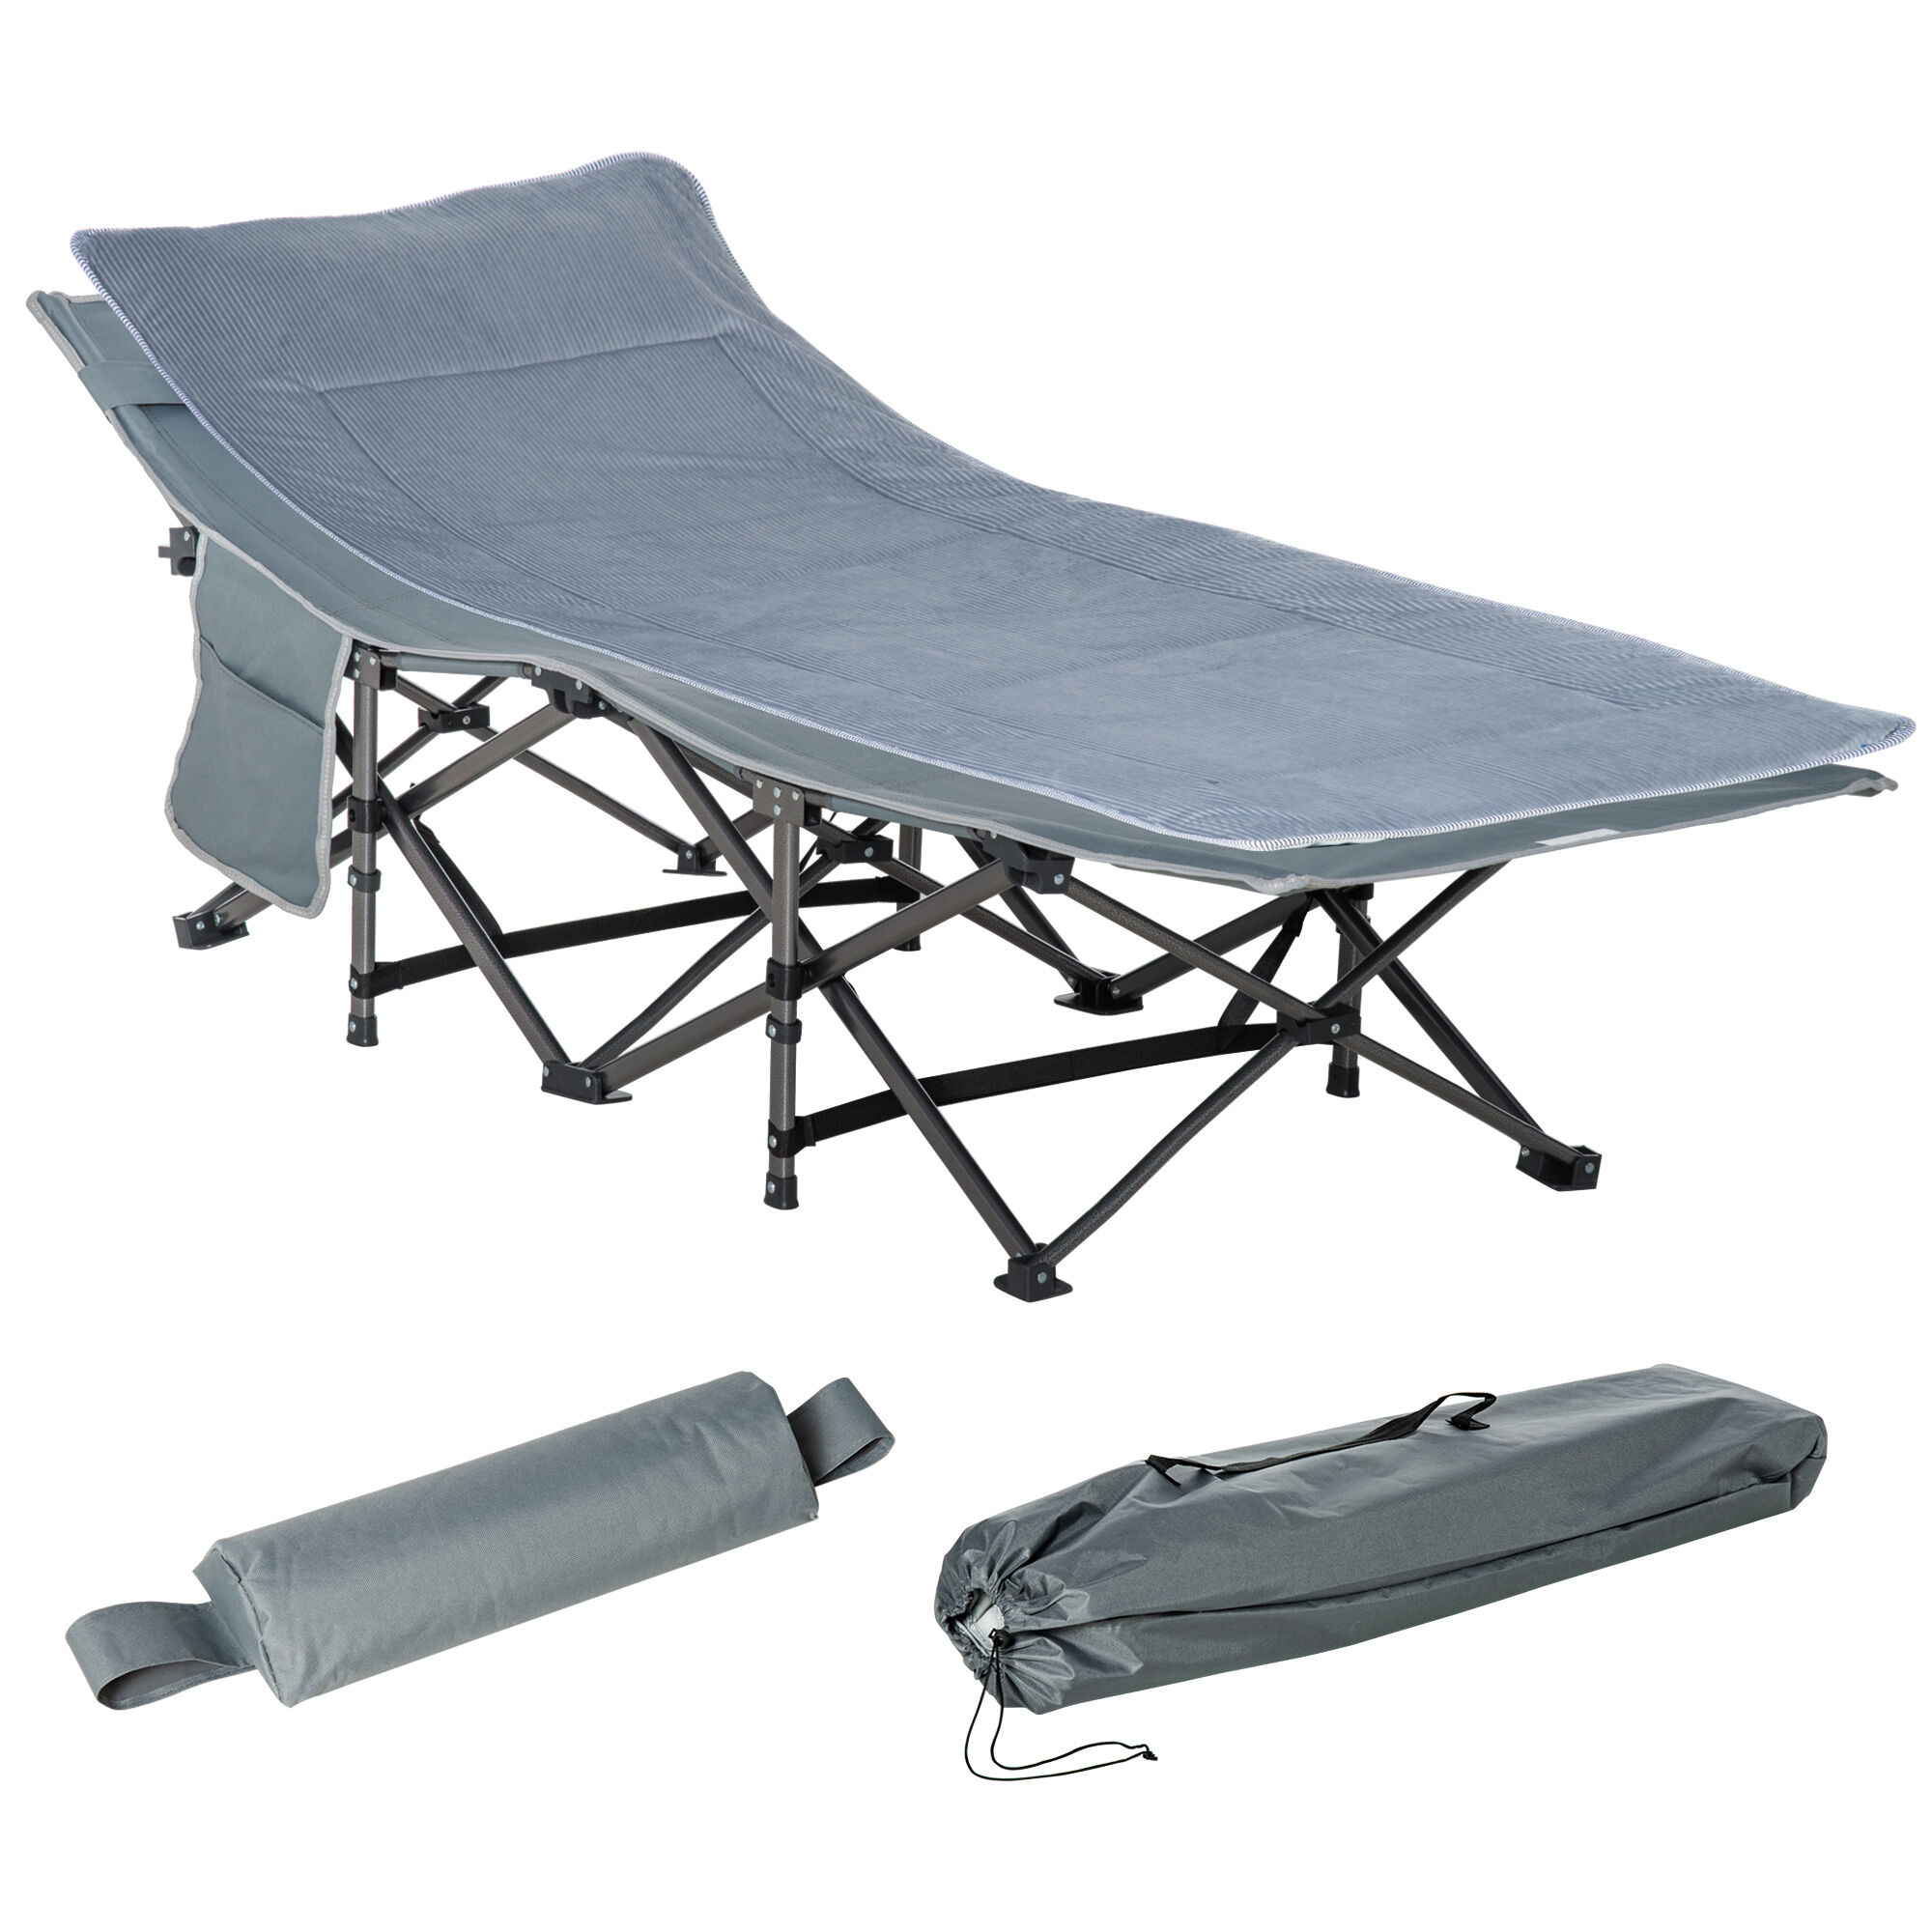 Outsunny 2 Person Heavy Duty Camping Cot with Mattress Portable Grey Sleeping Bed   Aosom.com